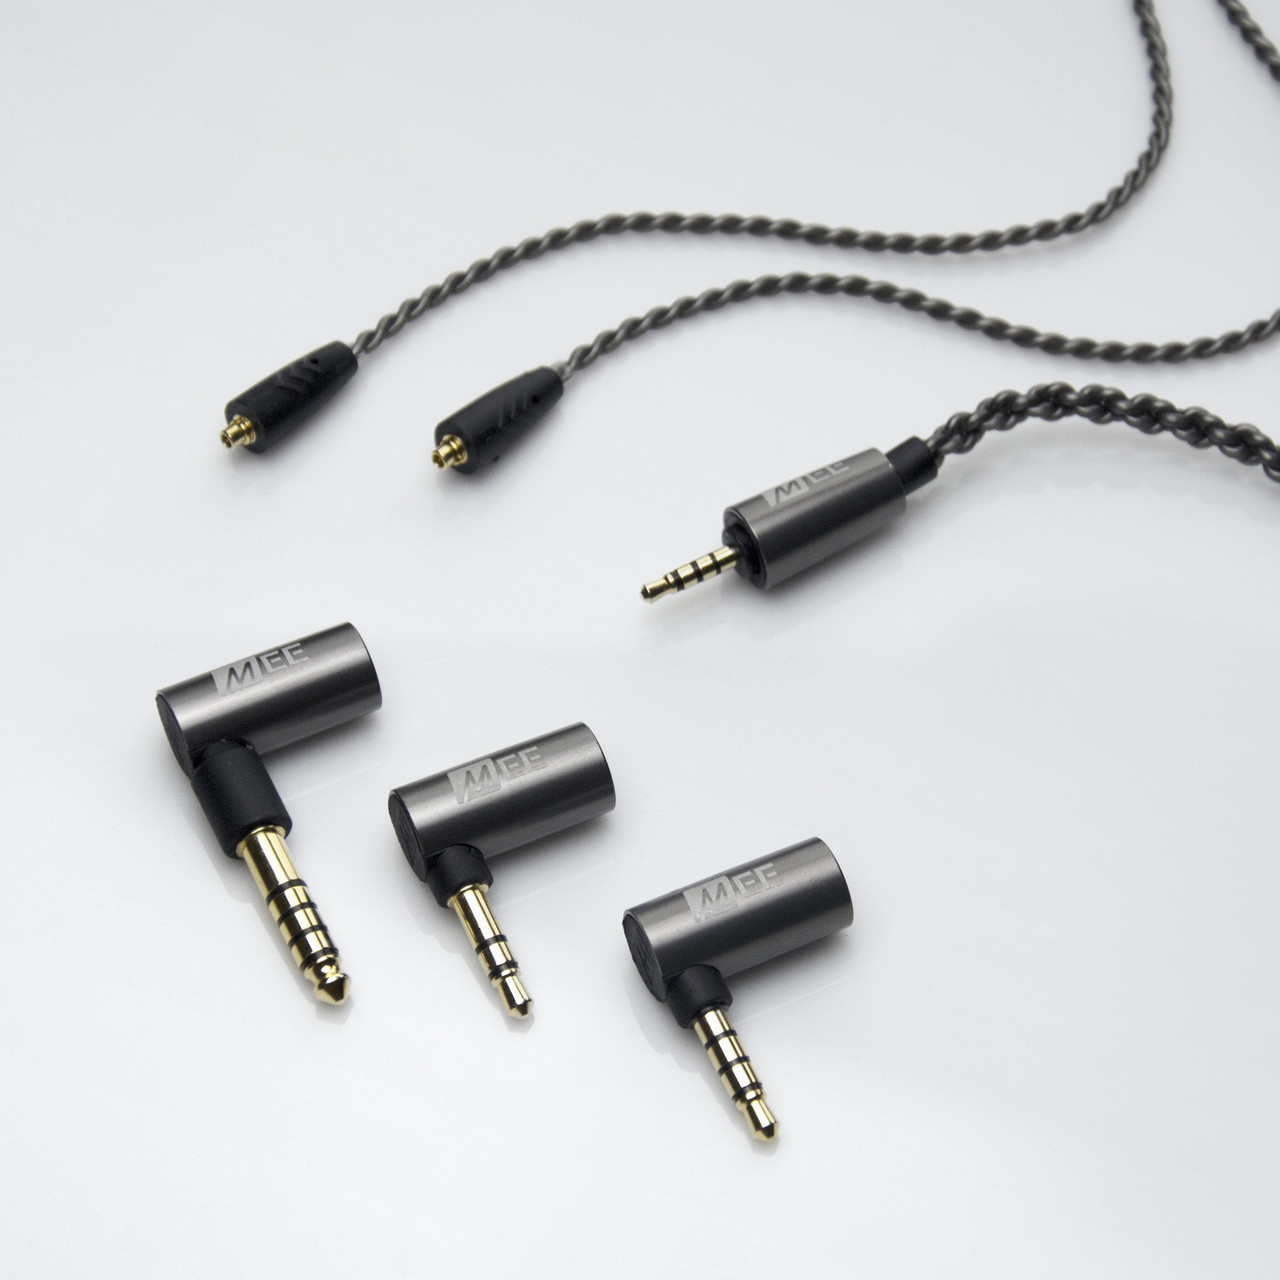 MEE audio Universal MMCX 2.5mm balanced audio cable with 3.5mm balanced,  4.4mm balanced, and 3.5mm stereo adapter set for Astell&Kern, FiiO, Sony,  HiFiMan, and other balanced sources